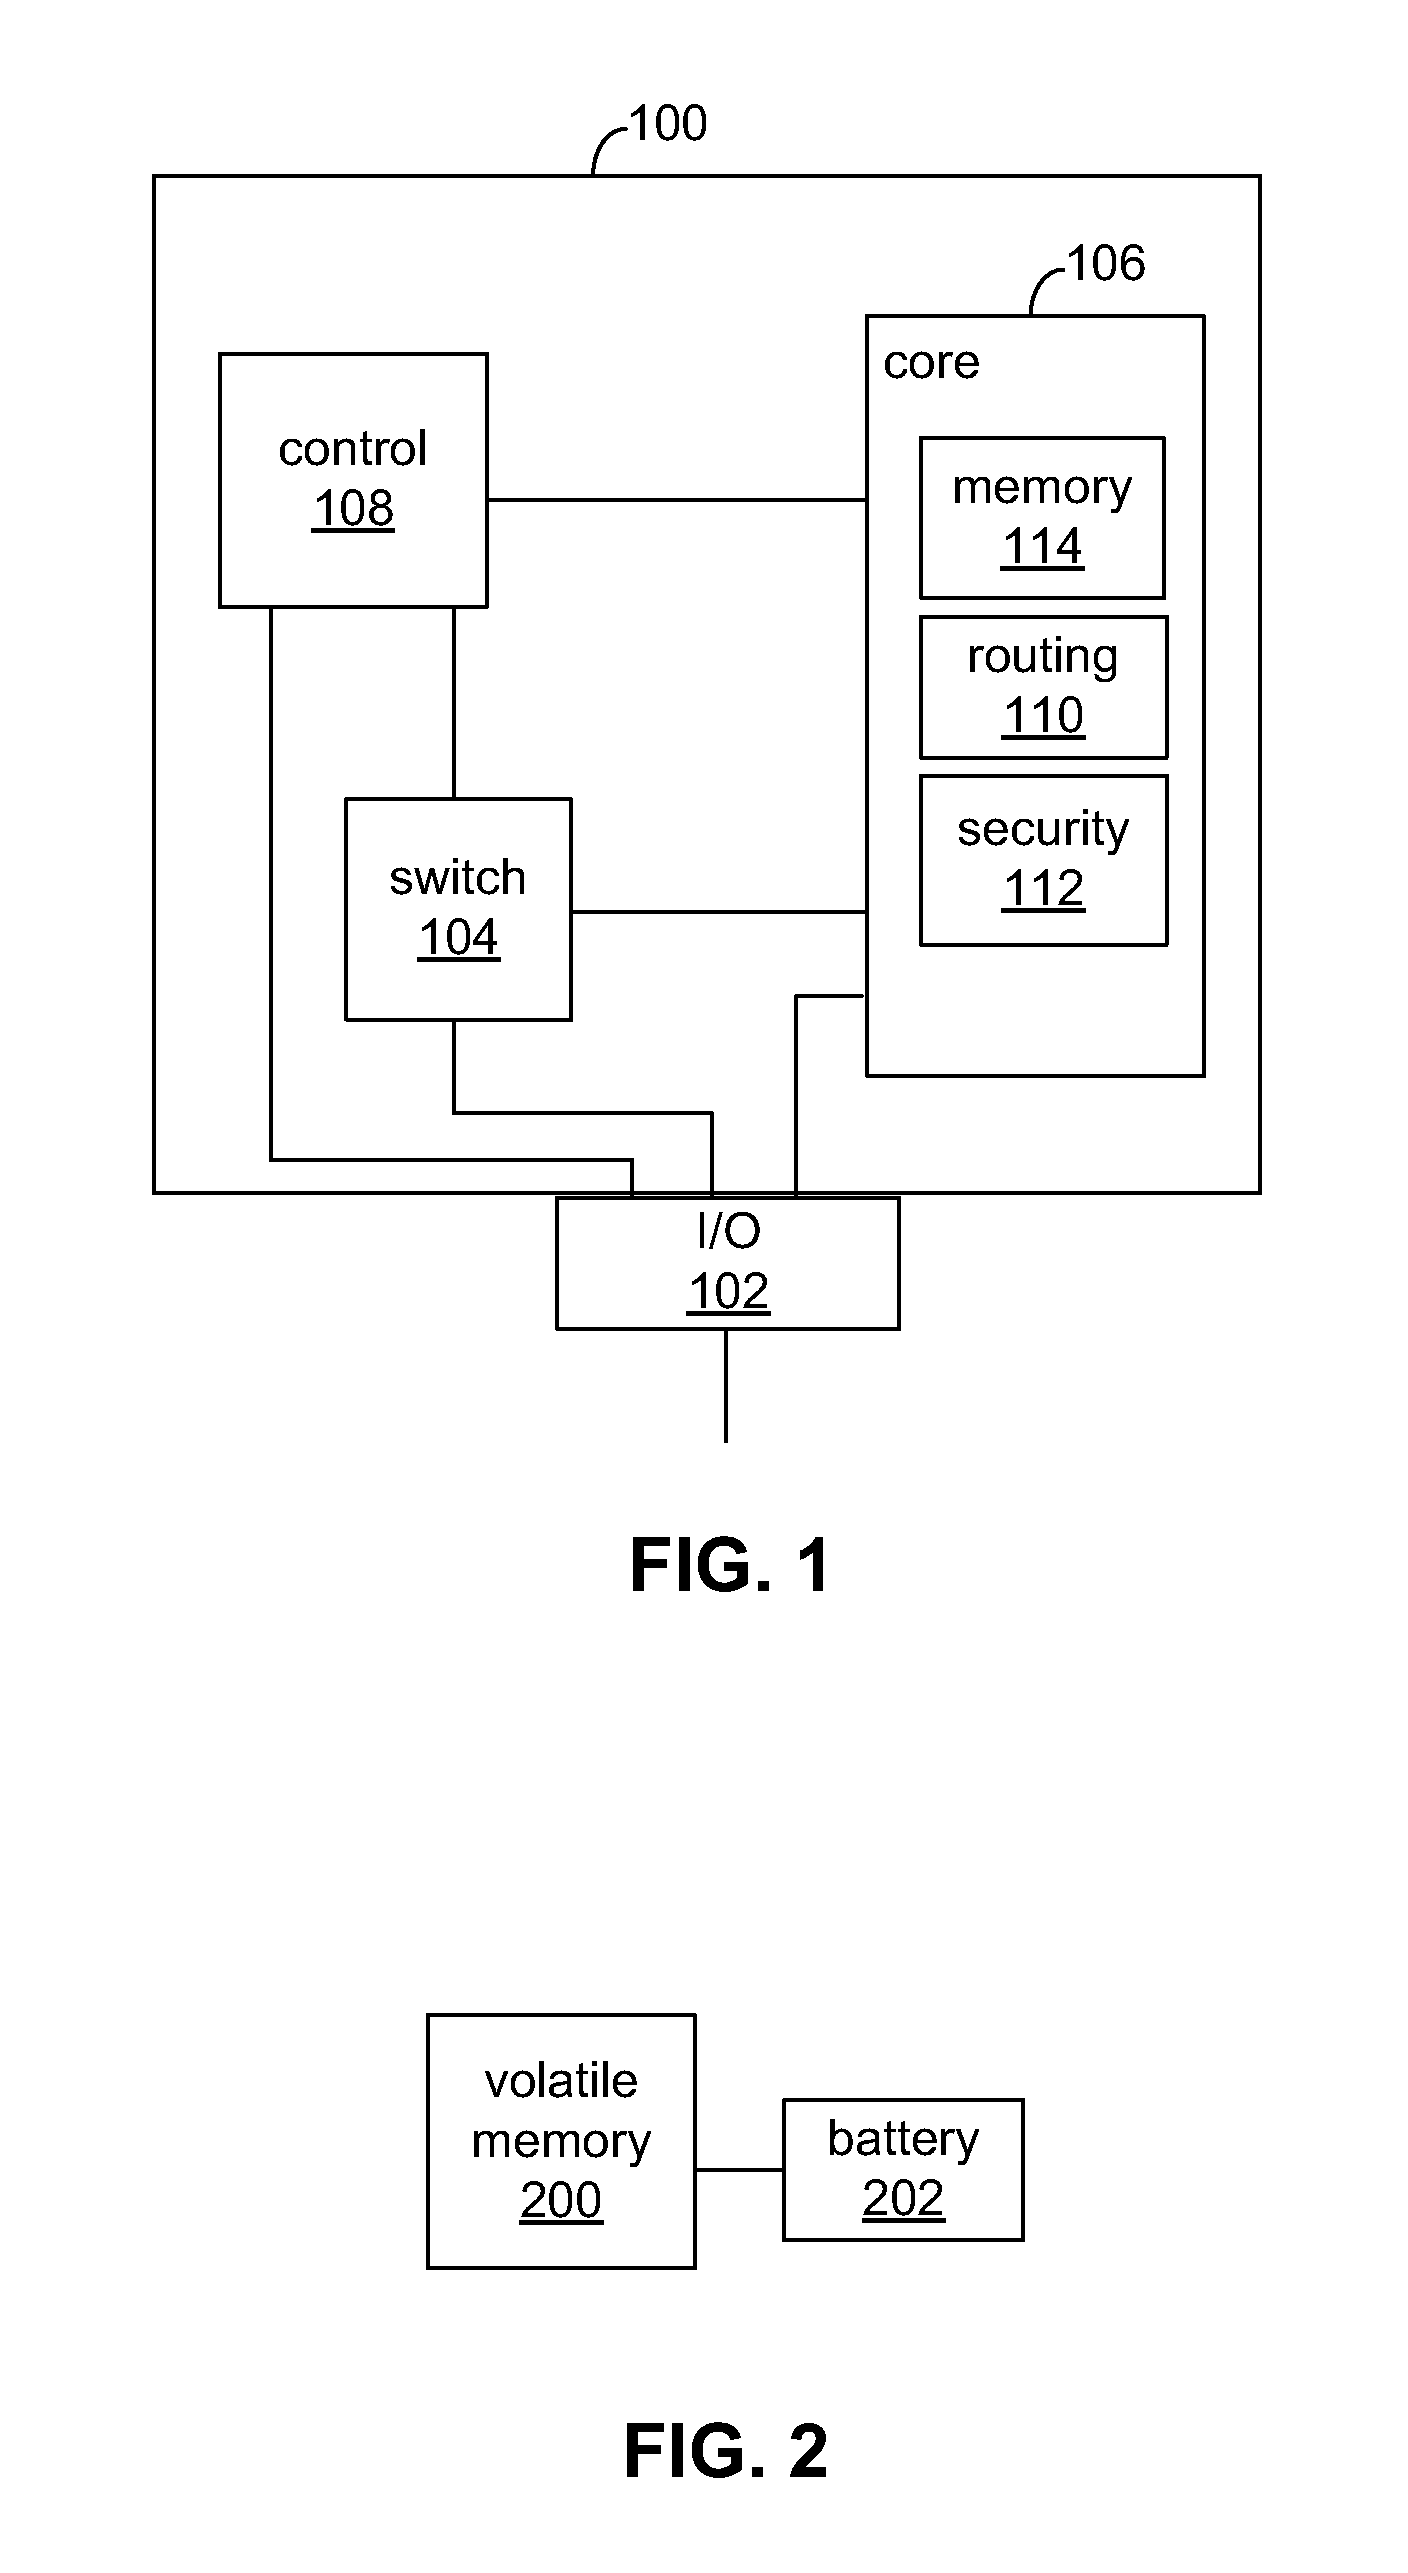 Method and apparatus for securing a programmable device using a kill switch